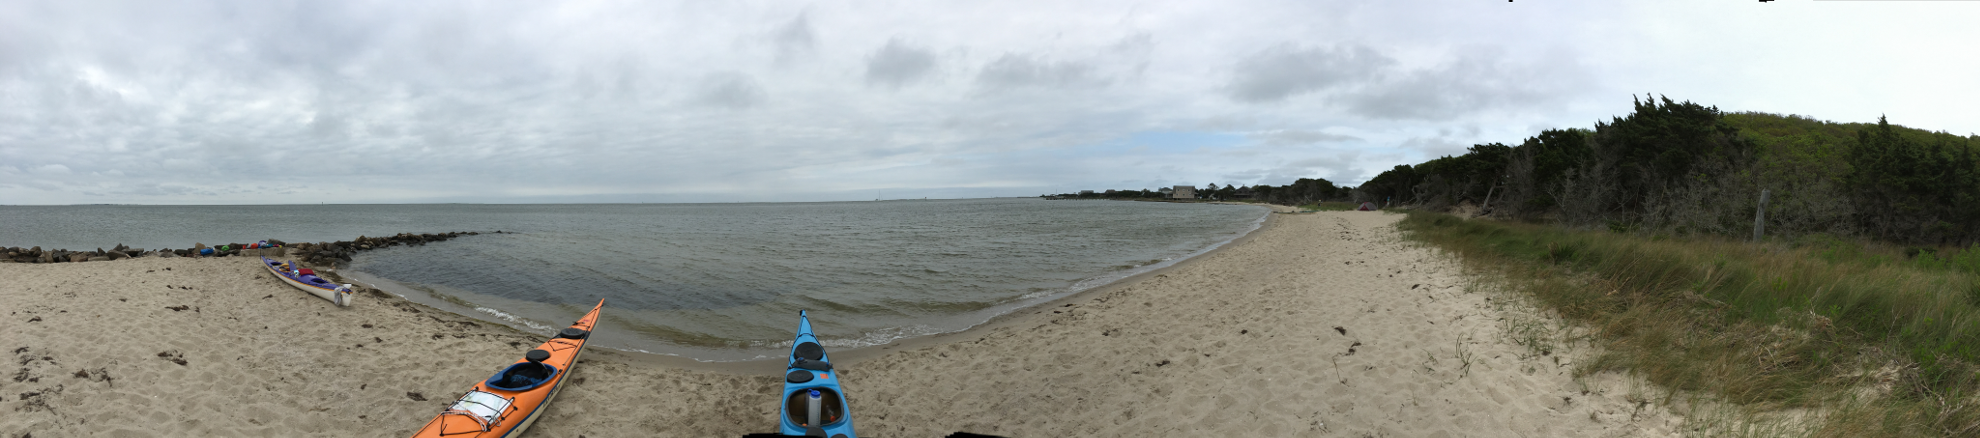 The View from Our Camp Site in Ocracoke.